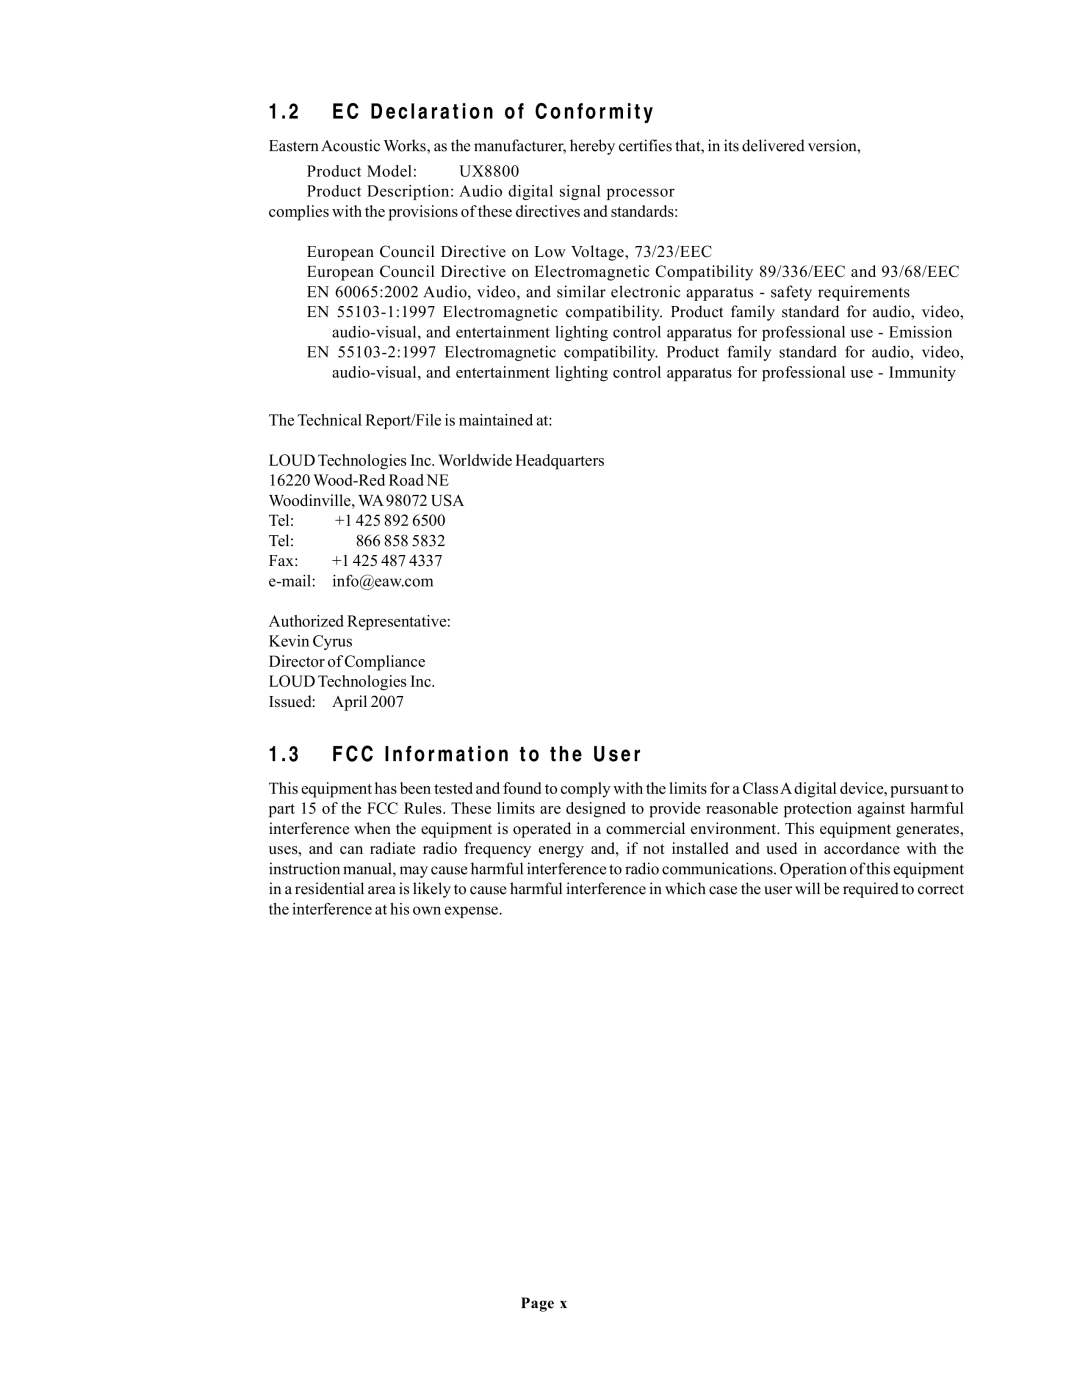 EAW UX8800 owner manual 1 . 2 EC Declaration of Conformity, 1 . 3 FCC Information to the User 